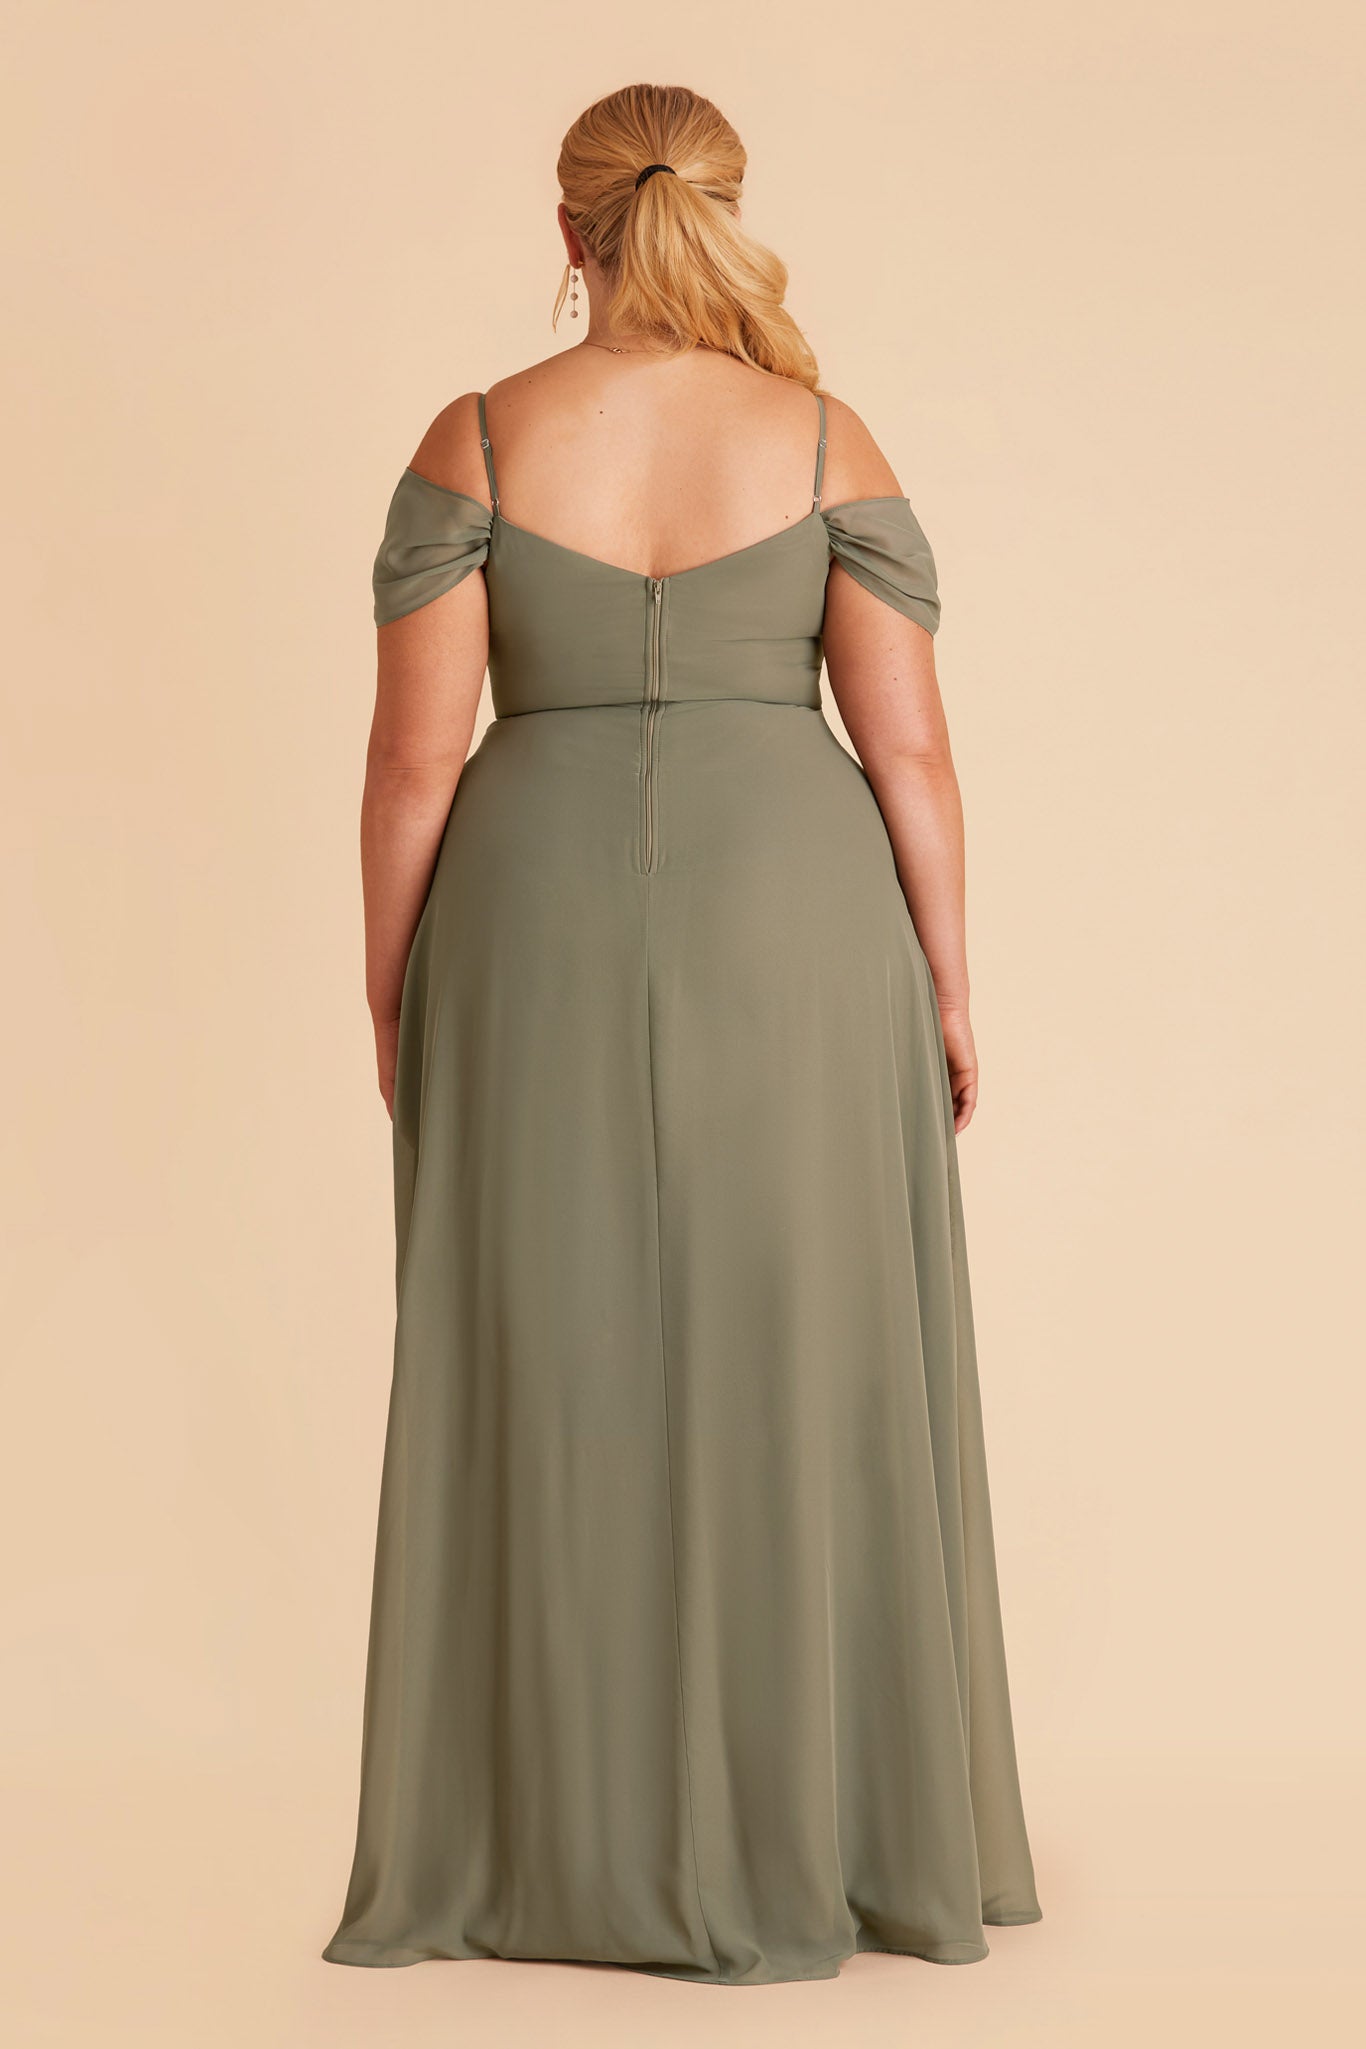 Devin plus size convertible bridesmaid dress with slit in moss green chiffon by Birdy Grey, back view